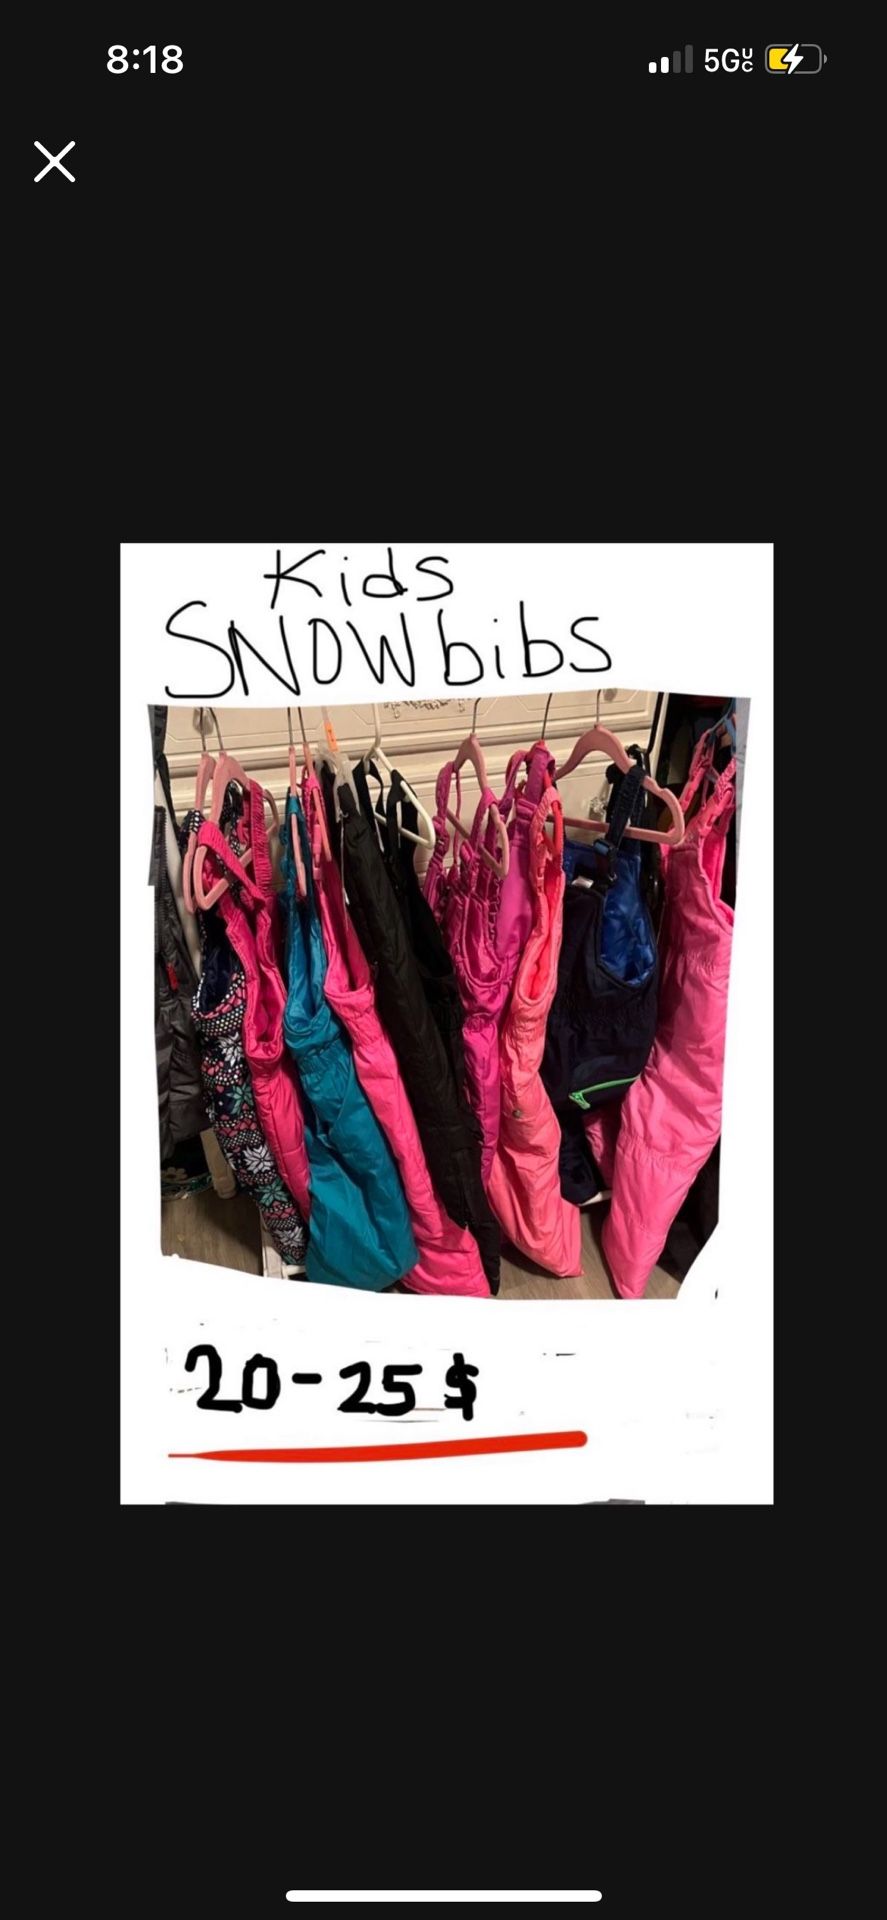 KIDS SNOWBIBS /SNOW PANTS  20$ -25$  EACH pick up location downtown LA/you need station area. I also have Boots for kids $20. Please have exact cashh.